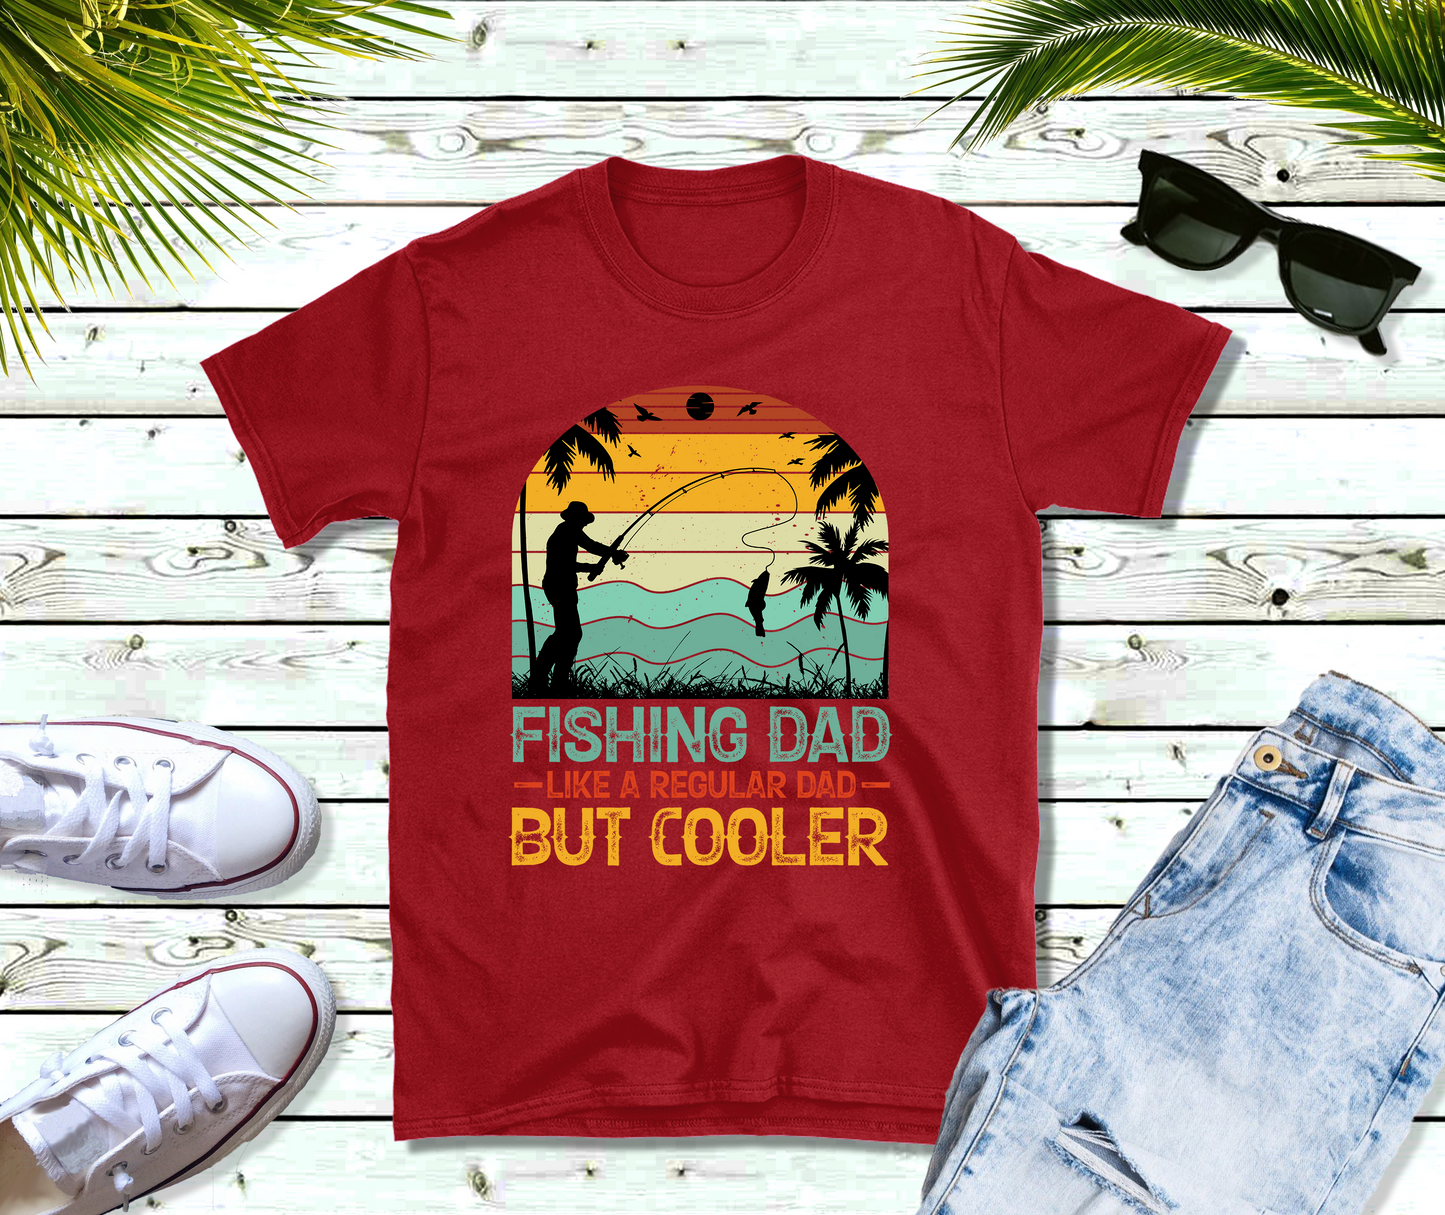 Fishing Dad: Like a Regular Dad, But Cooler T-Shirt | Unisex Fishing Tee | Father's Day Gift